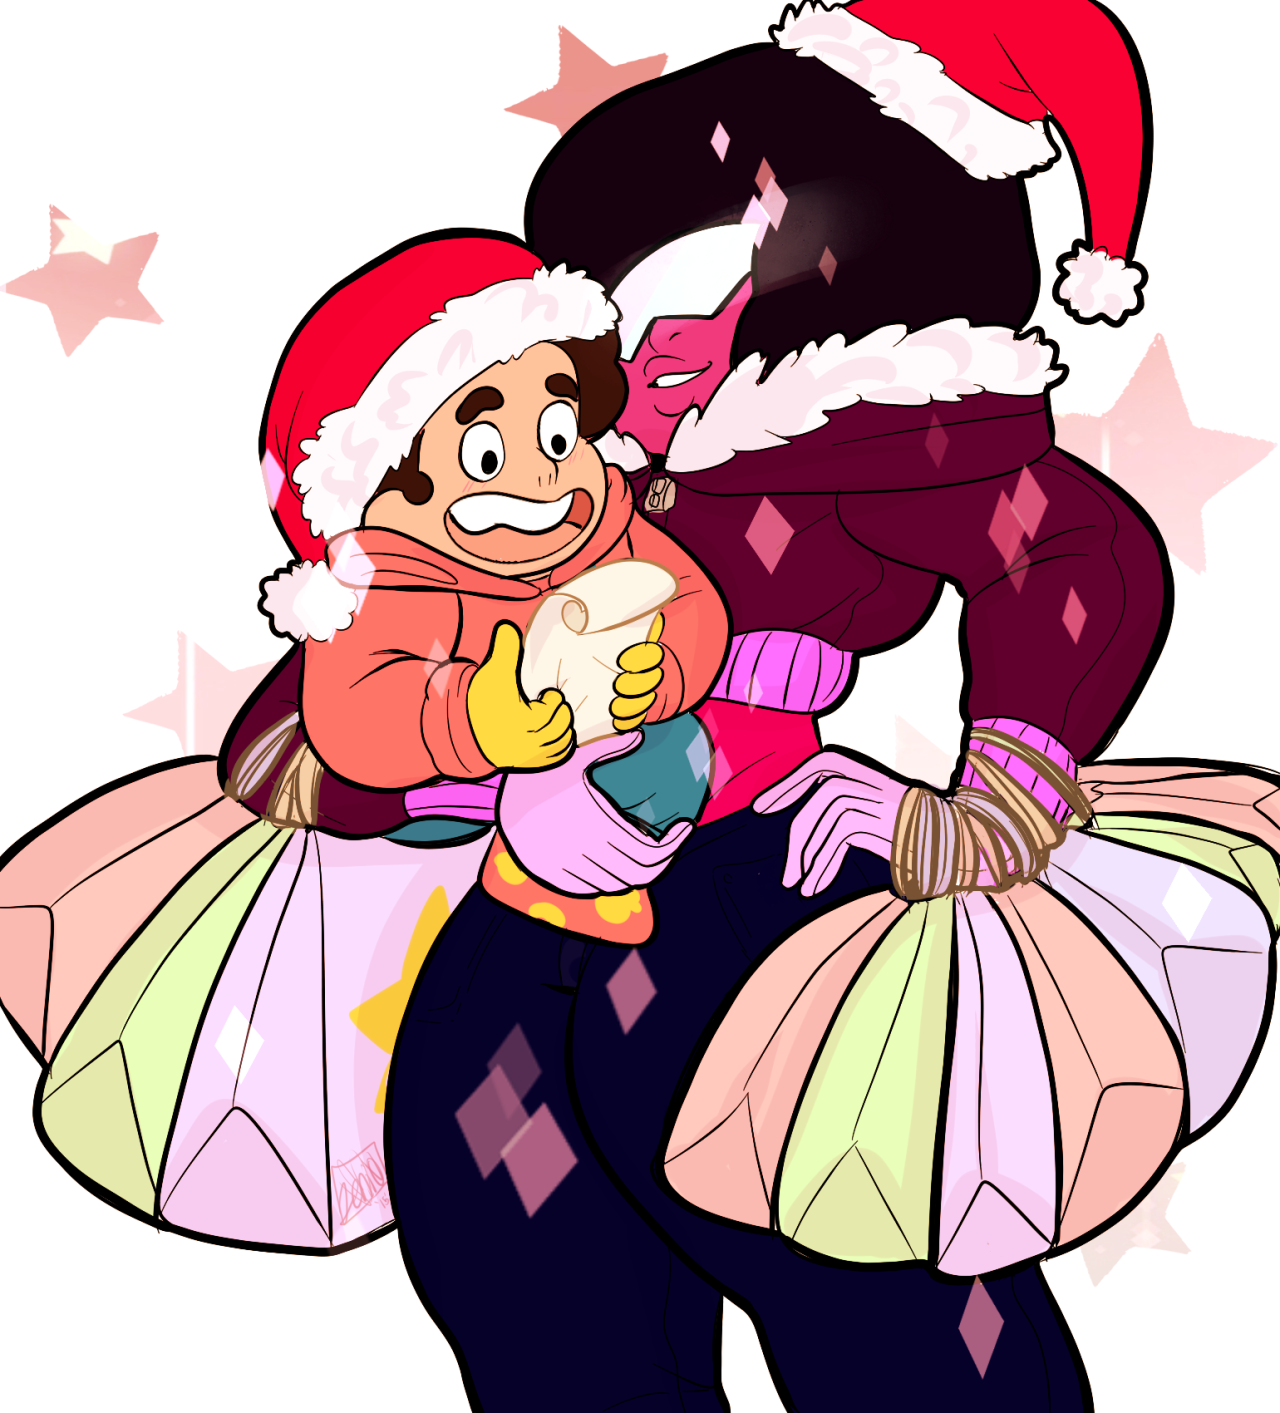 jen-iii:  They’re going Christmas shopping together because Steven wants to get